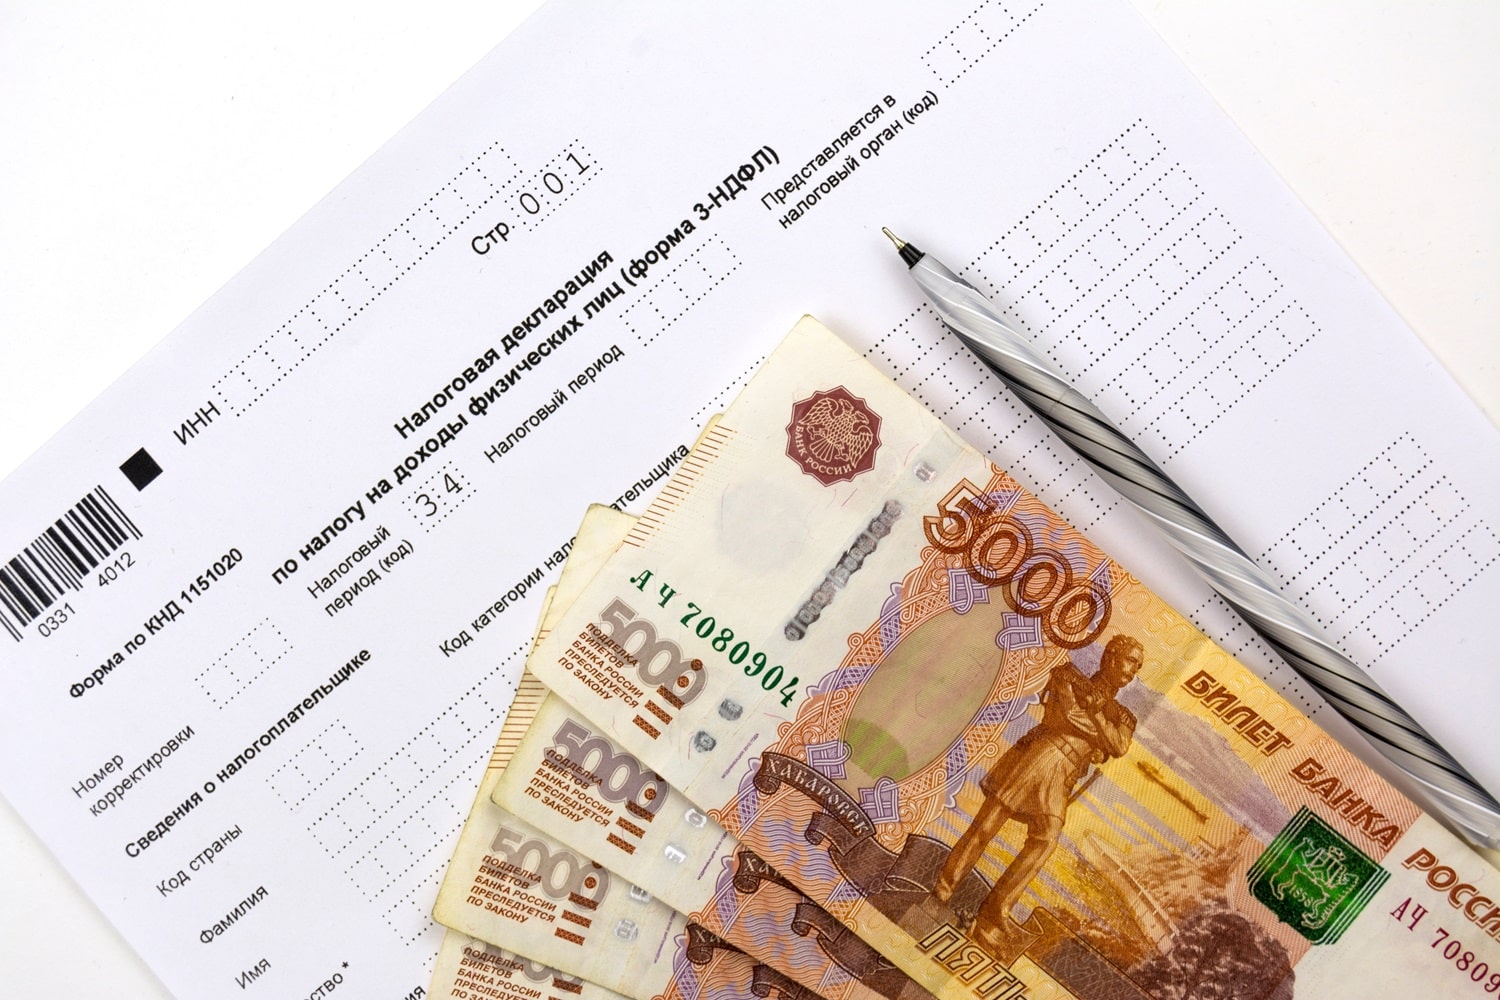 Several Russian 5000 rubles banknotes next to a pen on a tax/income declaration form.